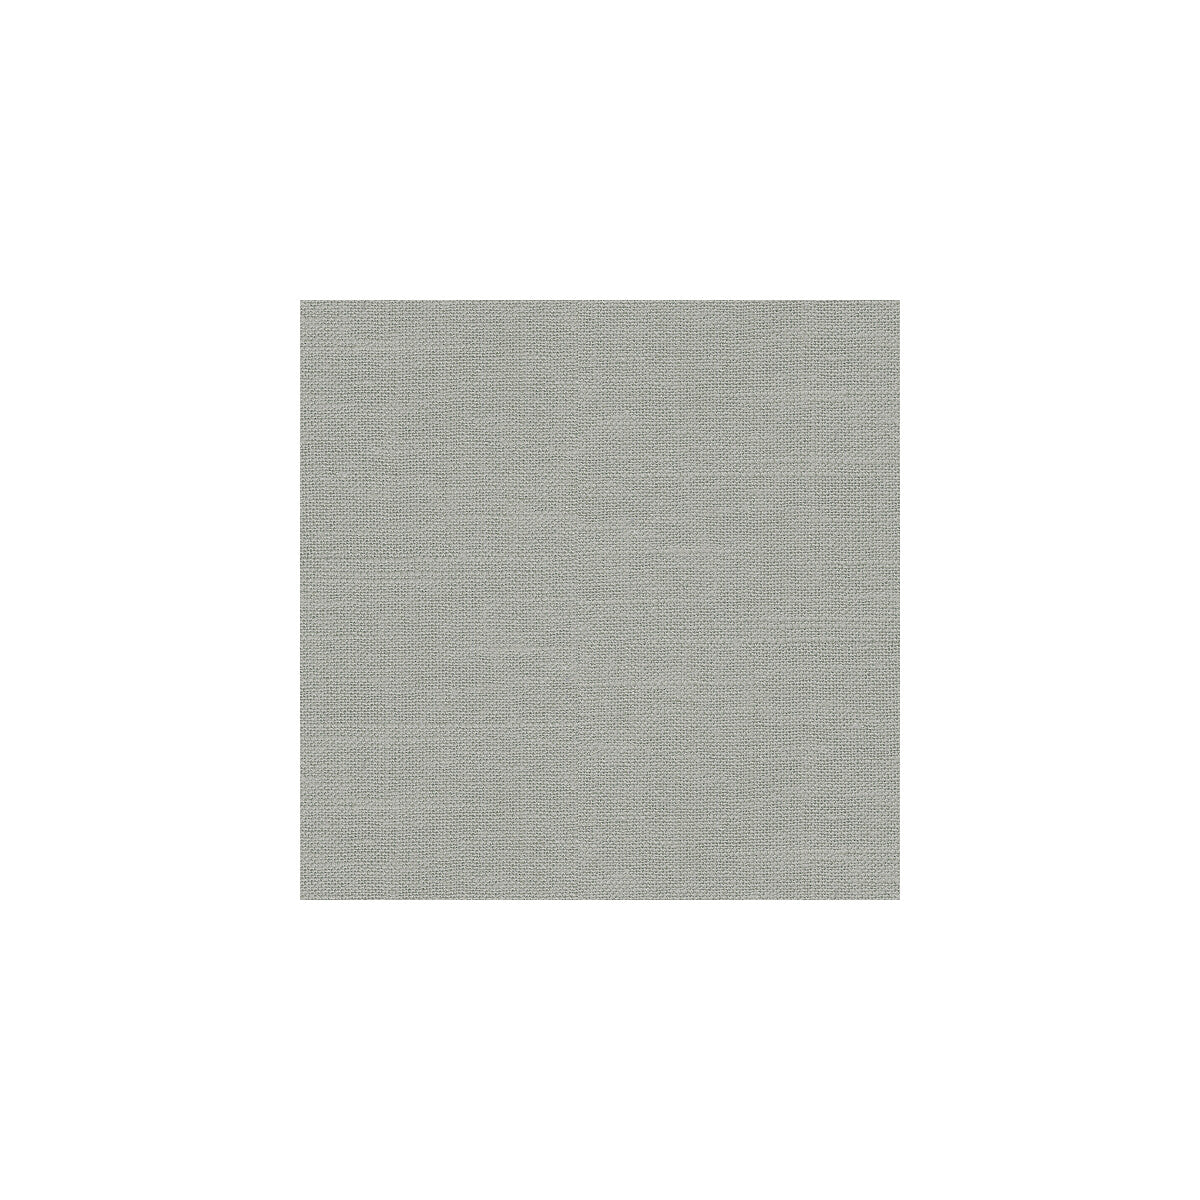 Barnegat fabric in blue gray color - pattern 24573.11.0 - by Kravet Basics in the Perfect Plains collection